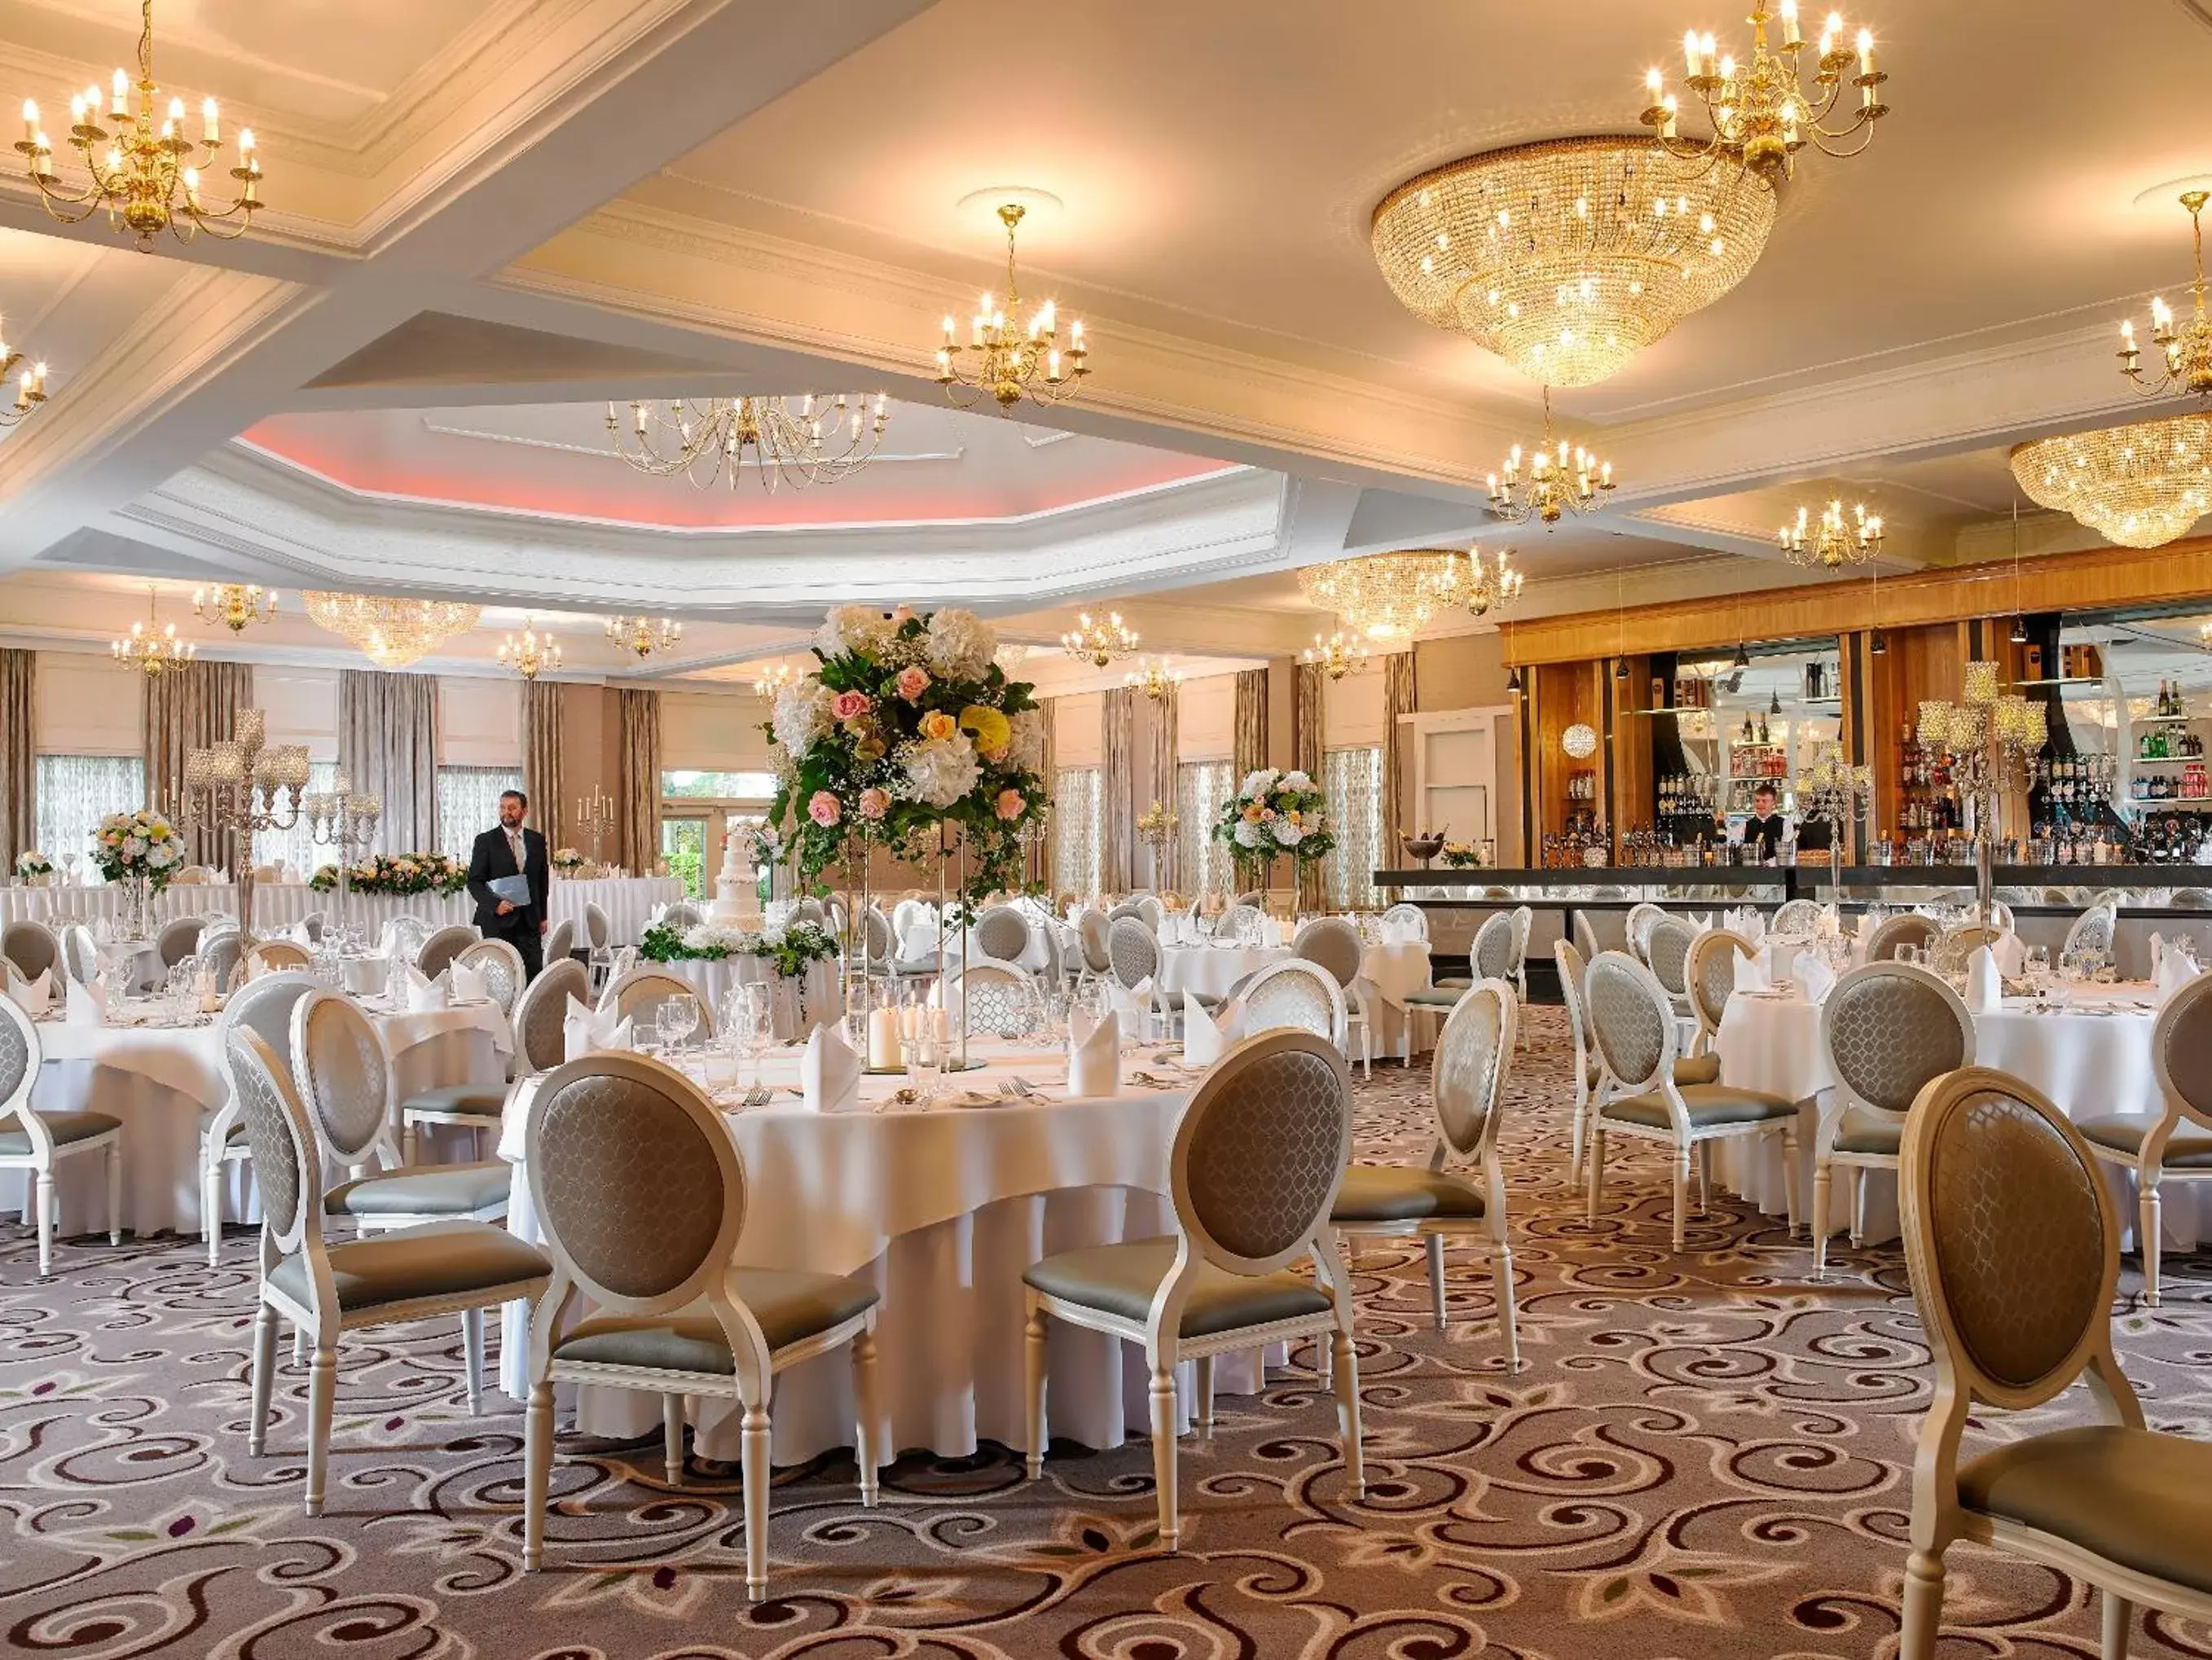 Banquet/Function facilities in Castlecourt Hotel, Spa & Leisure